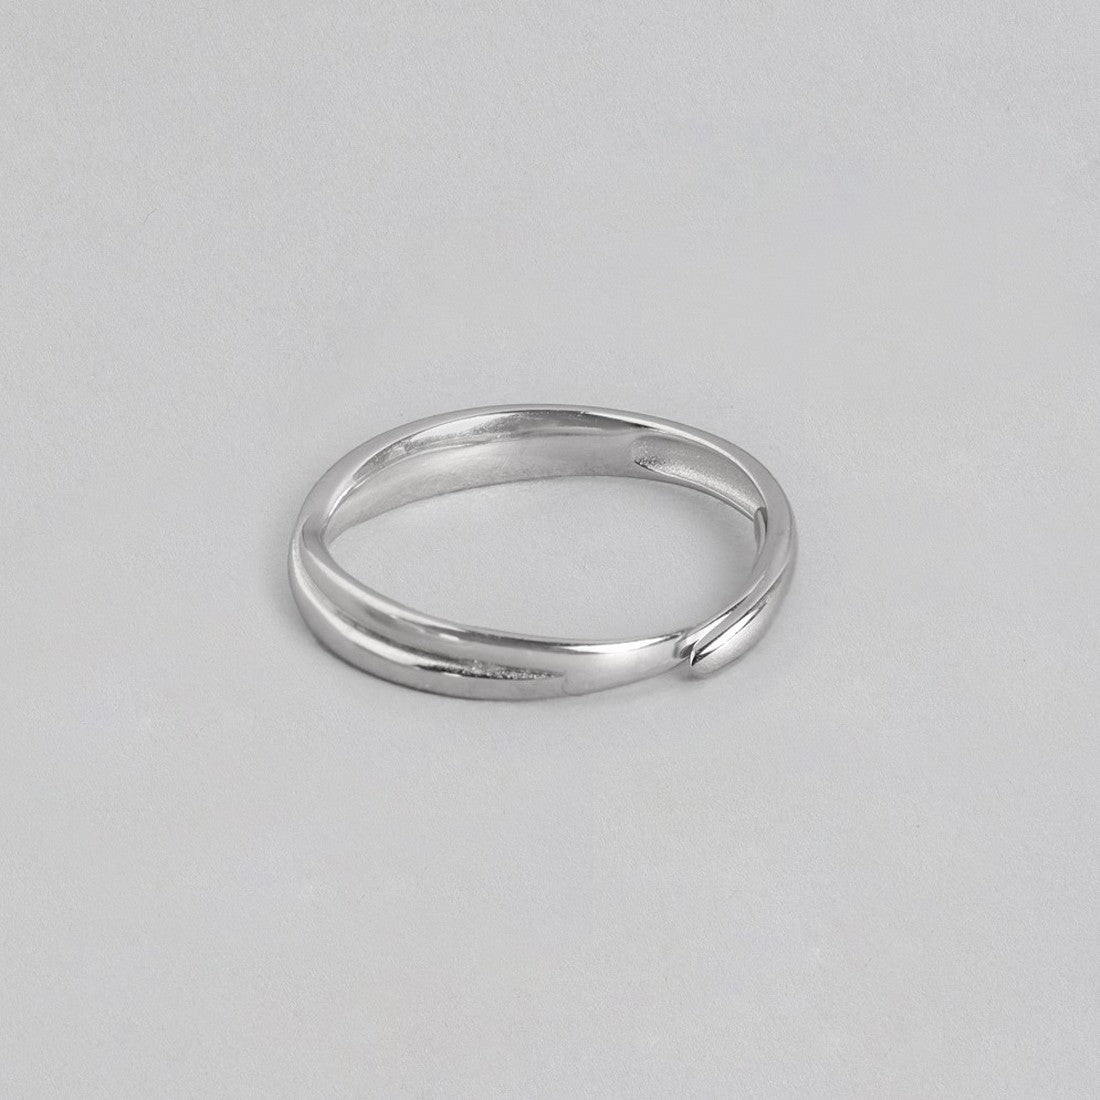 Crossover Rhodium Plated 925 Sterling Silver Ring For Him (Adjustable)